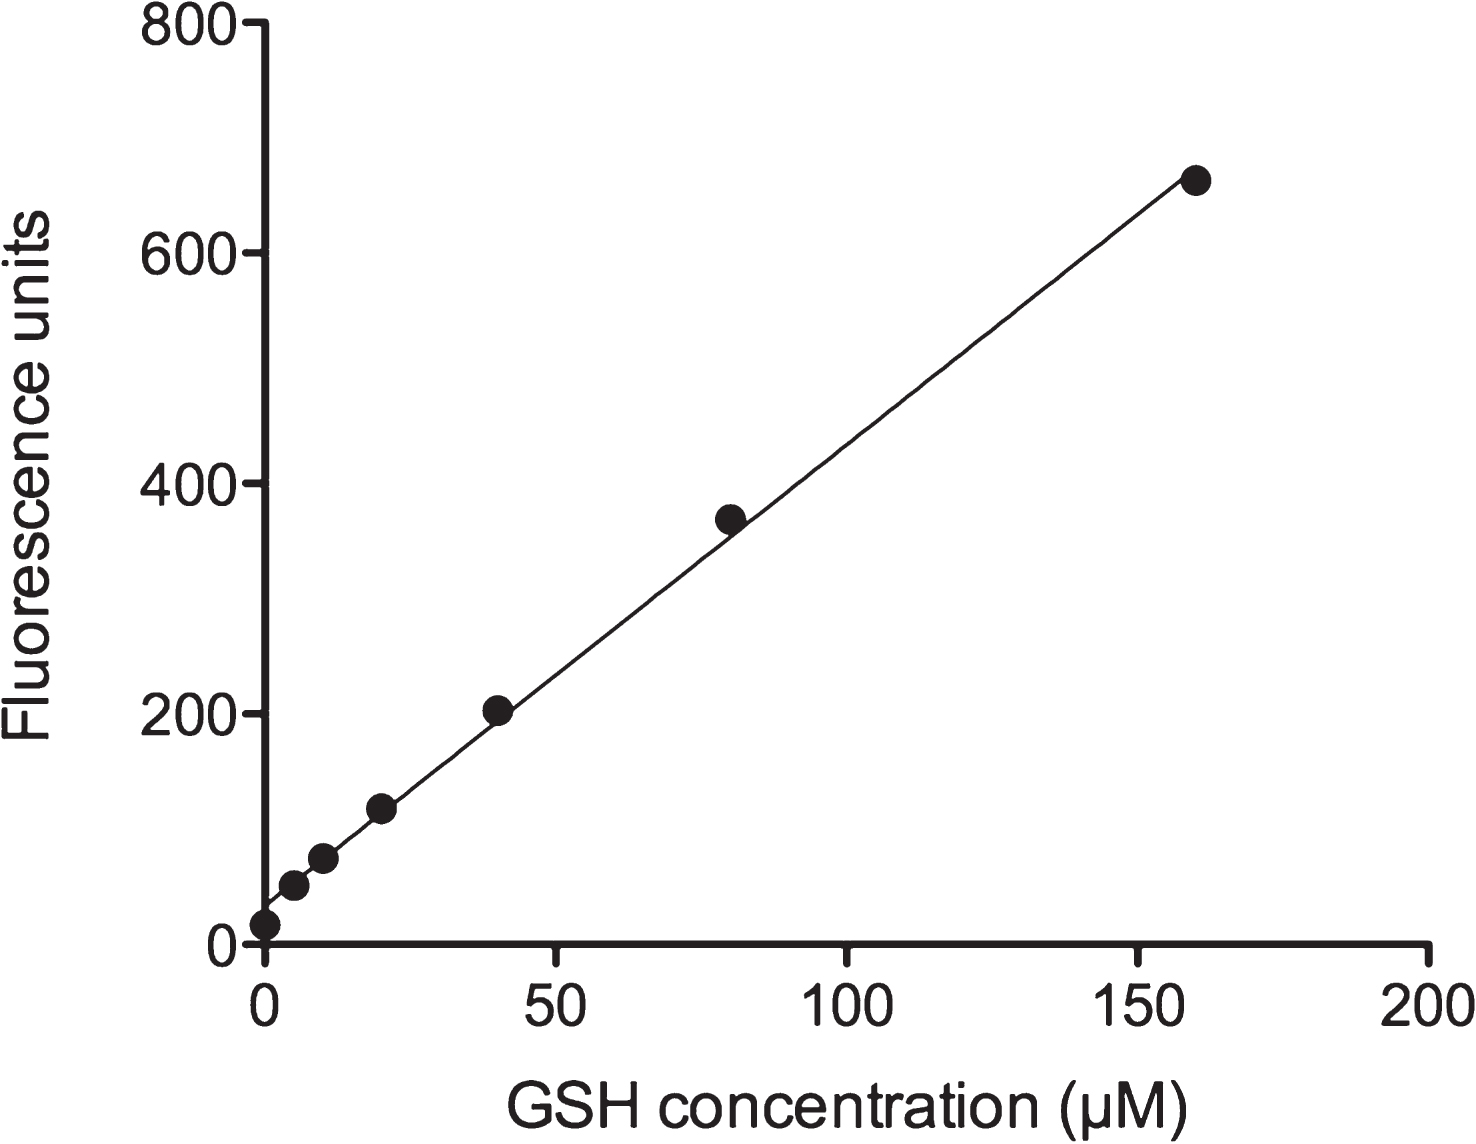 GSH calibration curve. GSH was diluted in PEB and incubated with OPA as described in Materials and Methods. Fluorescent GSH-OPA product was analyzed by using a Fluorescence Multi-Well Plate Reader (excitation 350 nm / emission 420 nm). One well containing only PEB was used as blank and subtracted from each sample value.